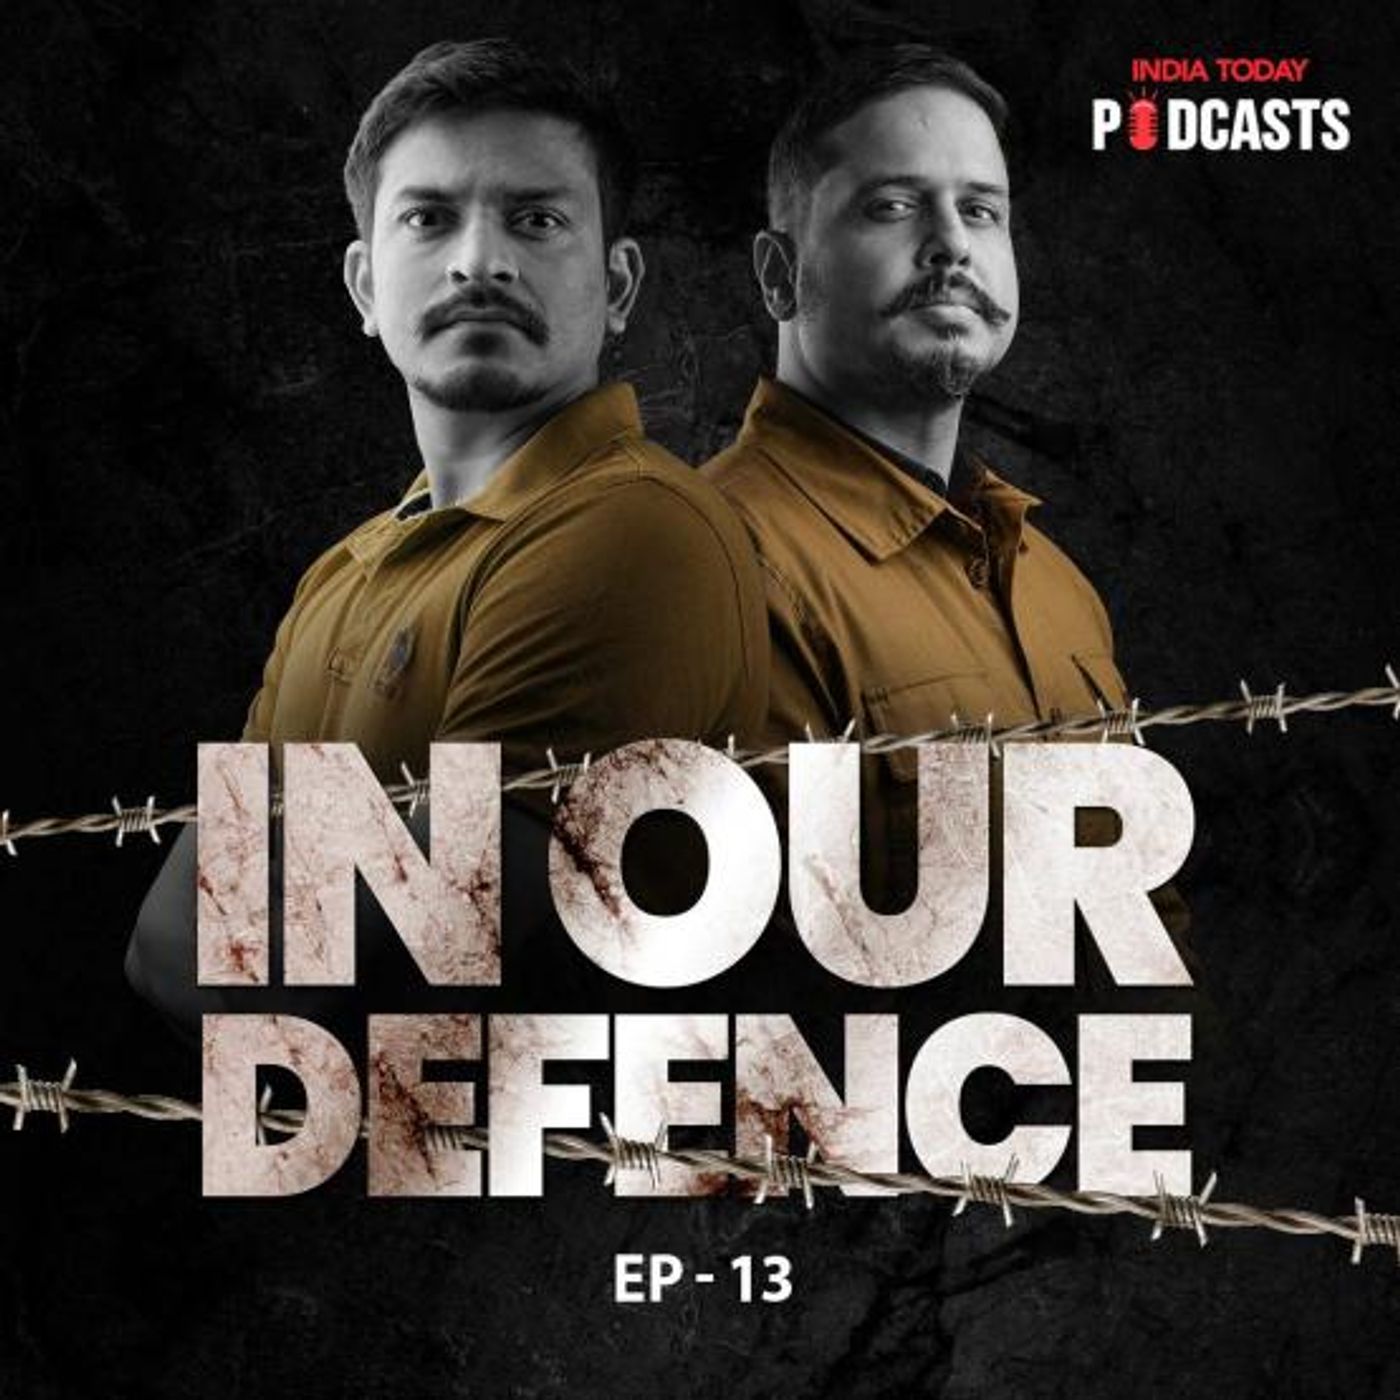 Revisiting 26/11: The Missteps, Lessons, and Path Not Taken | In Our Defence, S02, Ep 13